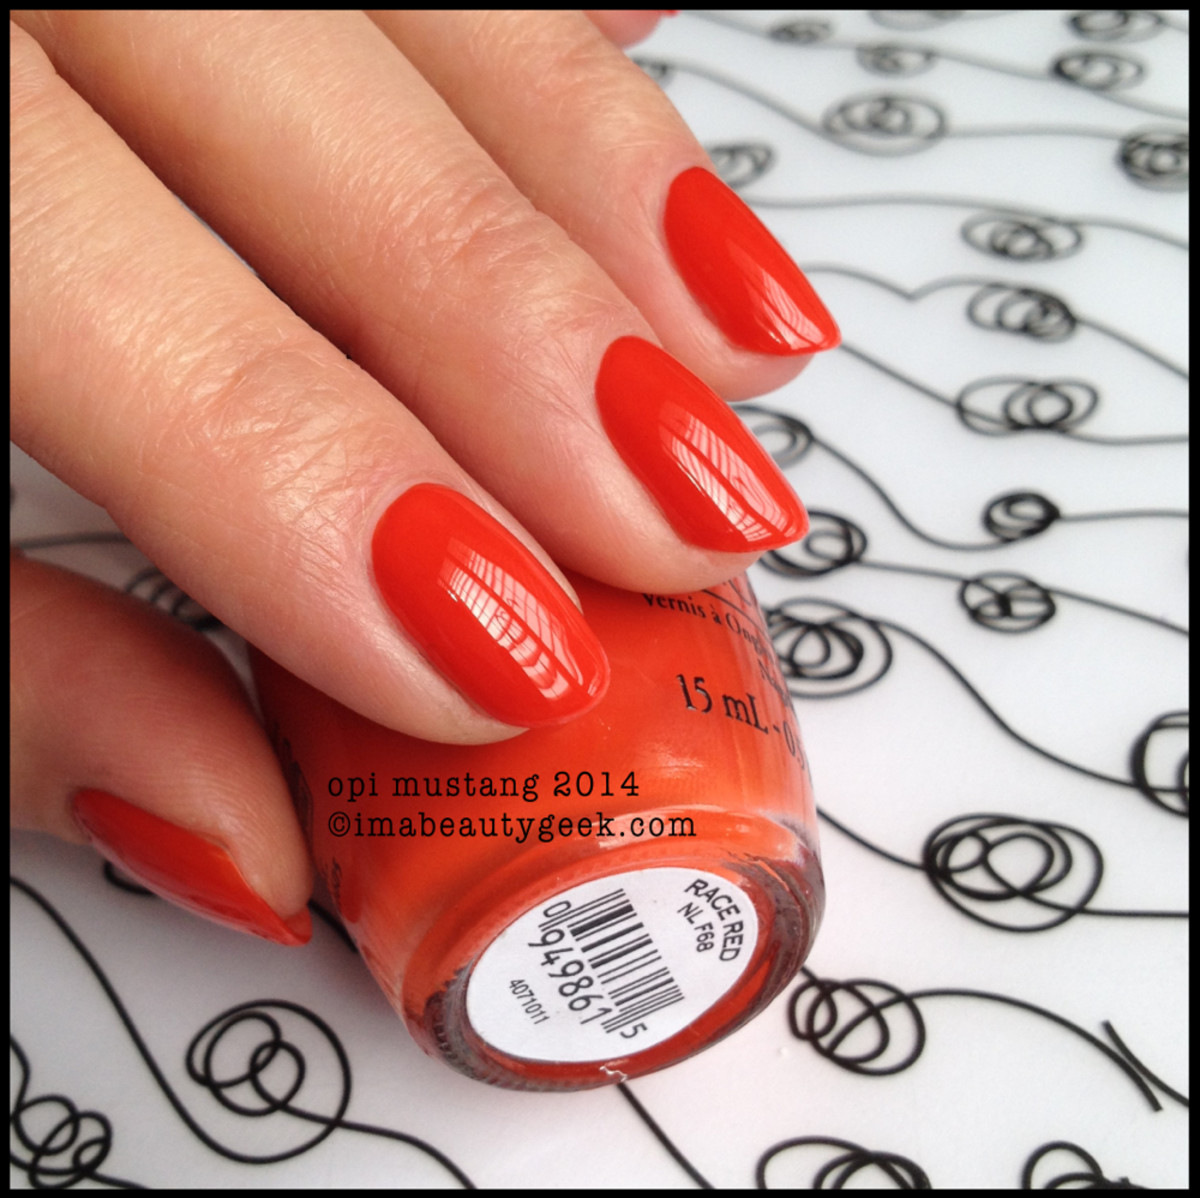 OPI Race Red Mustang 2014